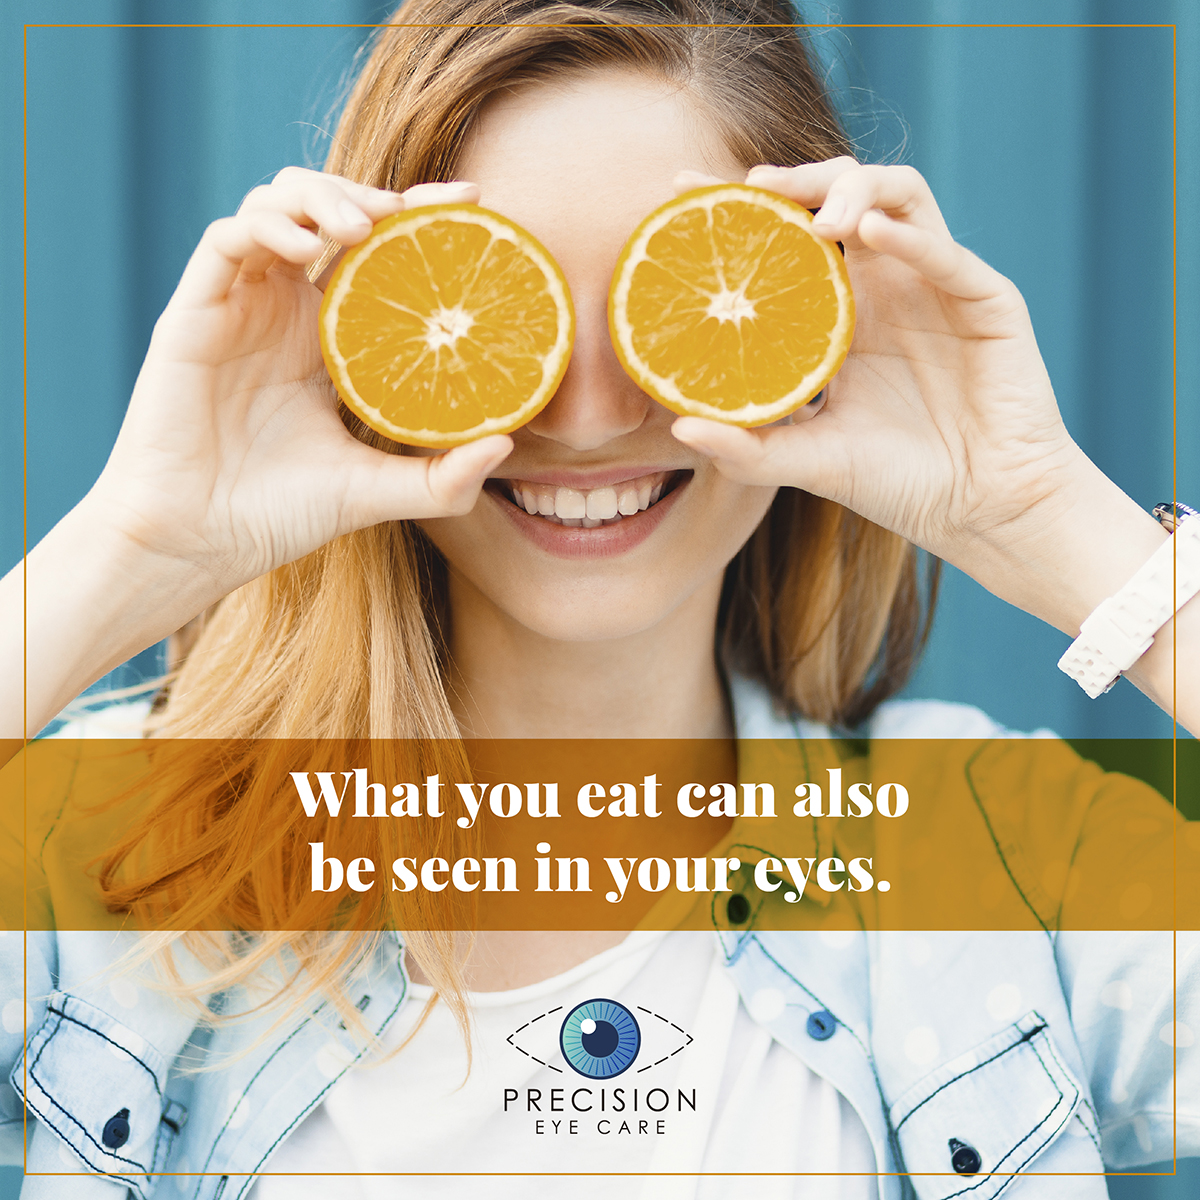 What you eat can also be seen in your eyes